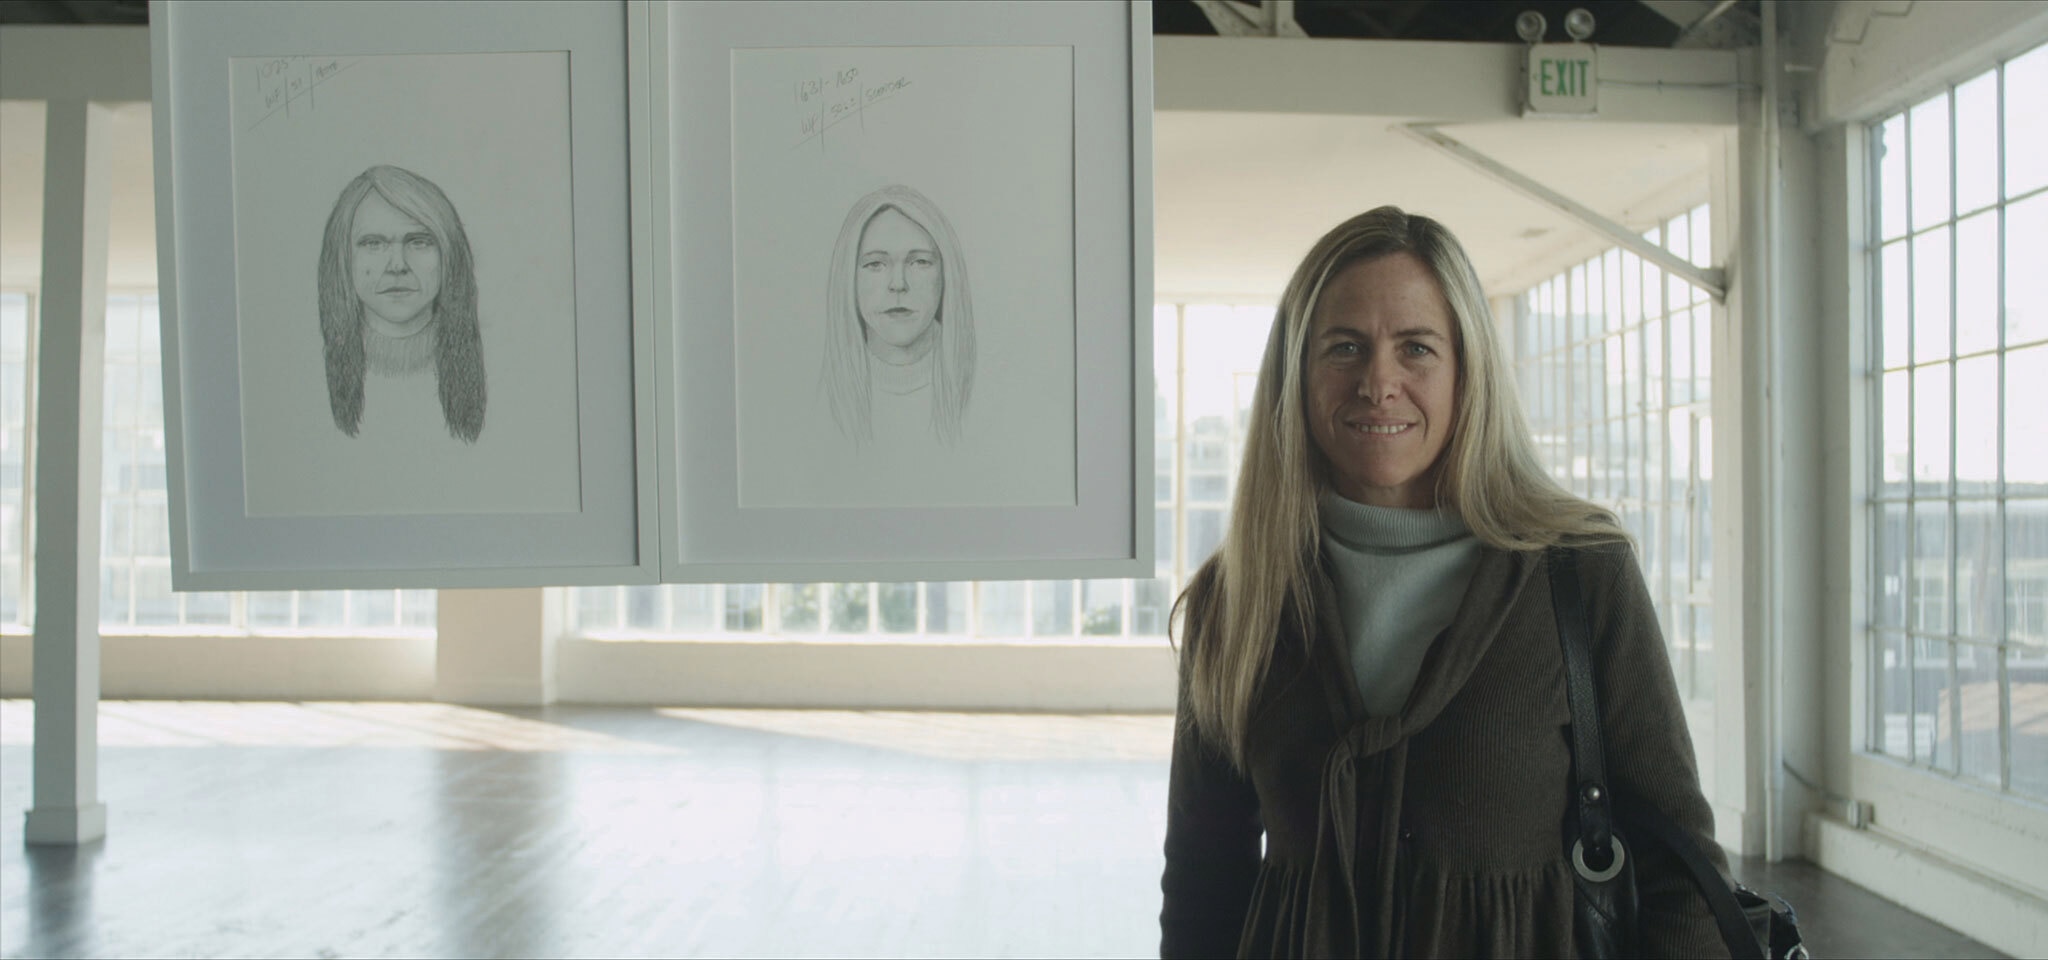 Blonde woman standing beside two potrait sketches